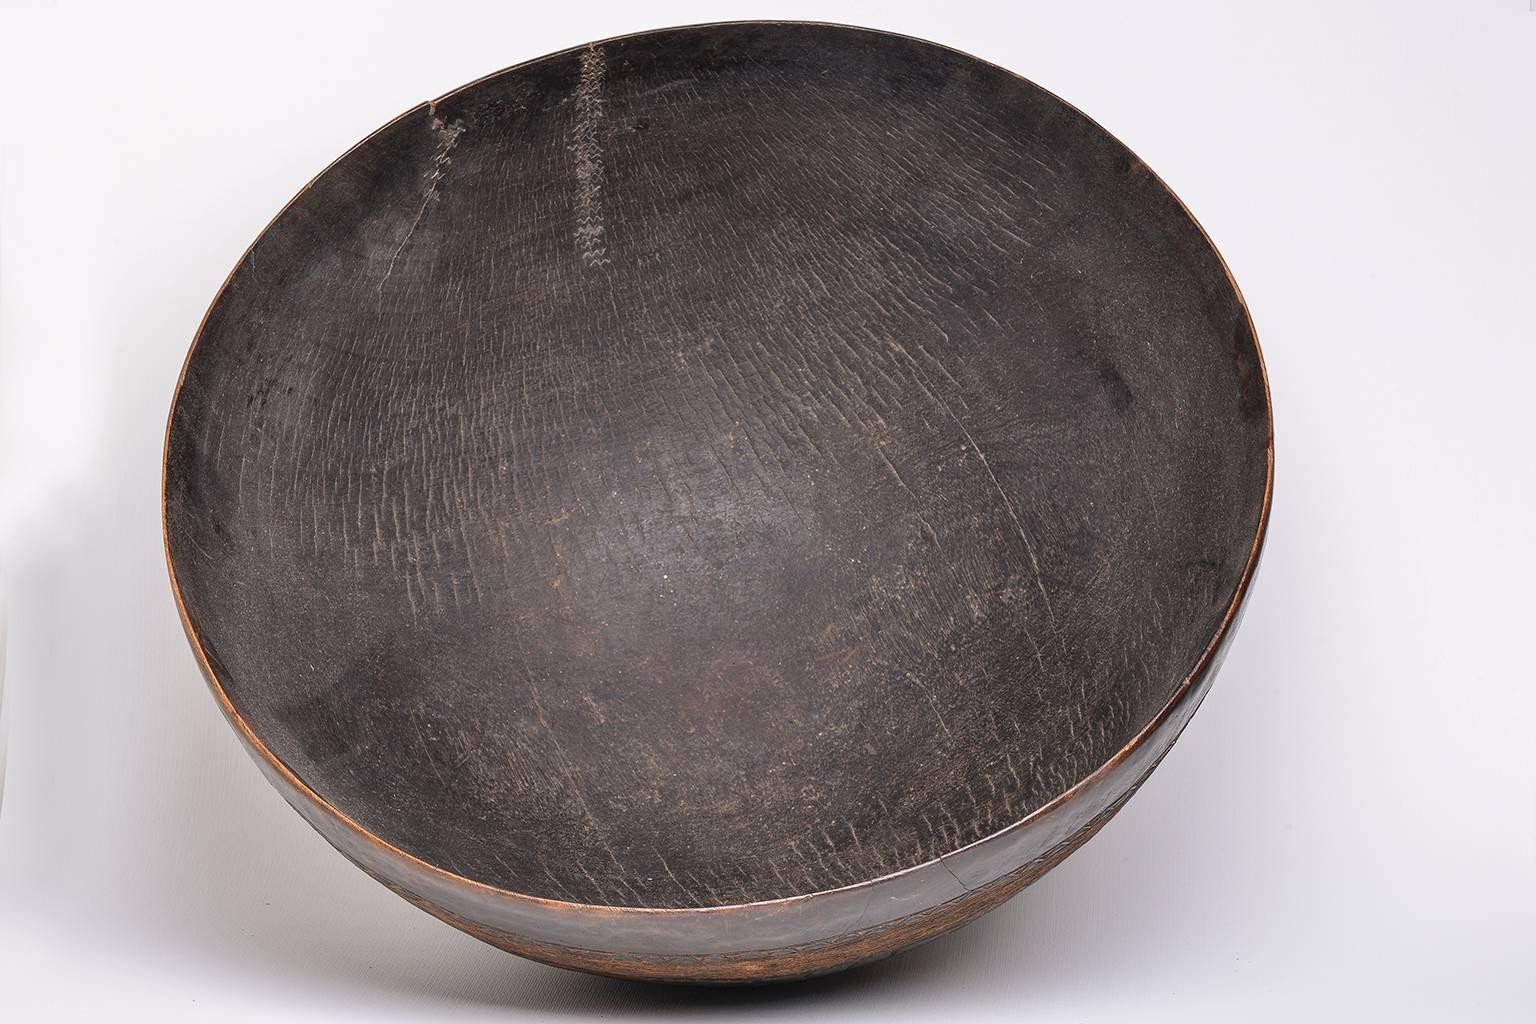 This large Tuareg bowl was carved off a single piece of wood, with incised geometric patterns around the exterior. The Tuareg are nomads living in the Saharian region of Northern Africa. They create beautiful carved bowls, light and easy to pack for